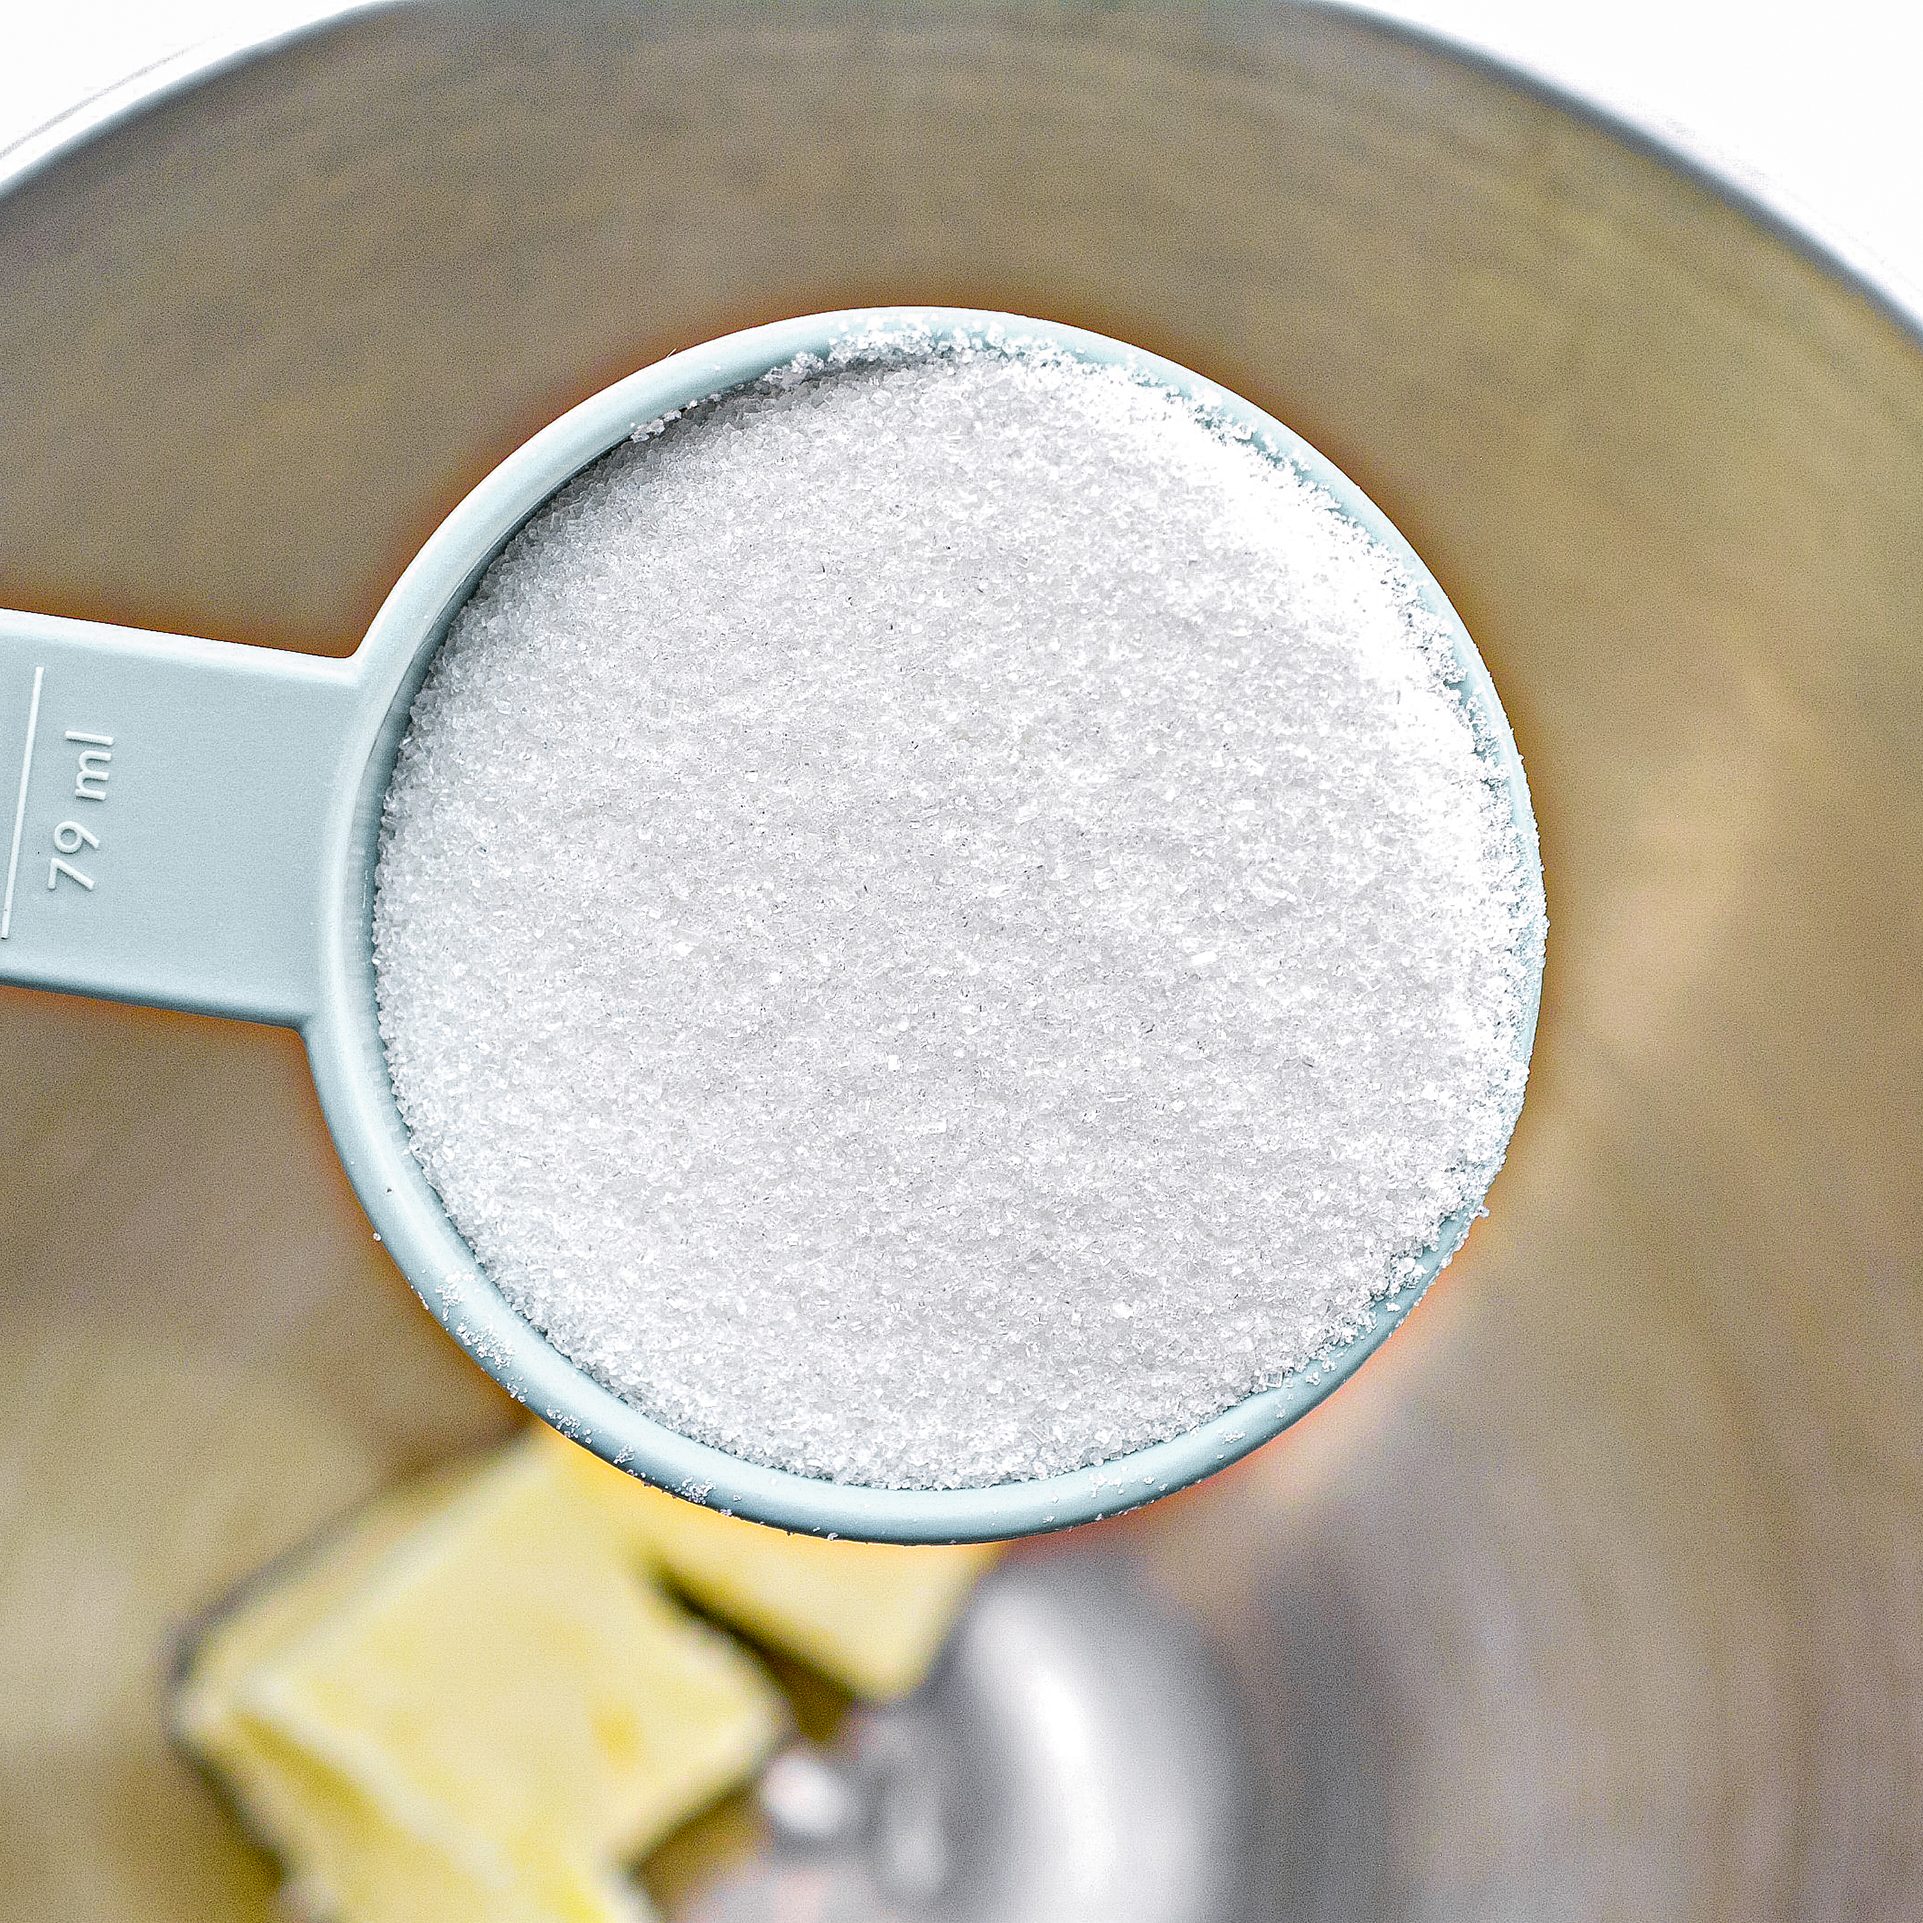 In a mixing bowl, cream together the ⅓ cup butter and ⅔ cup sugar until smooth.